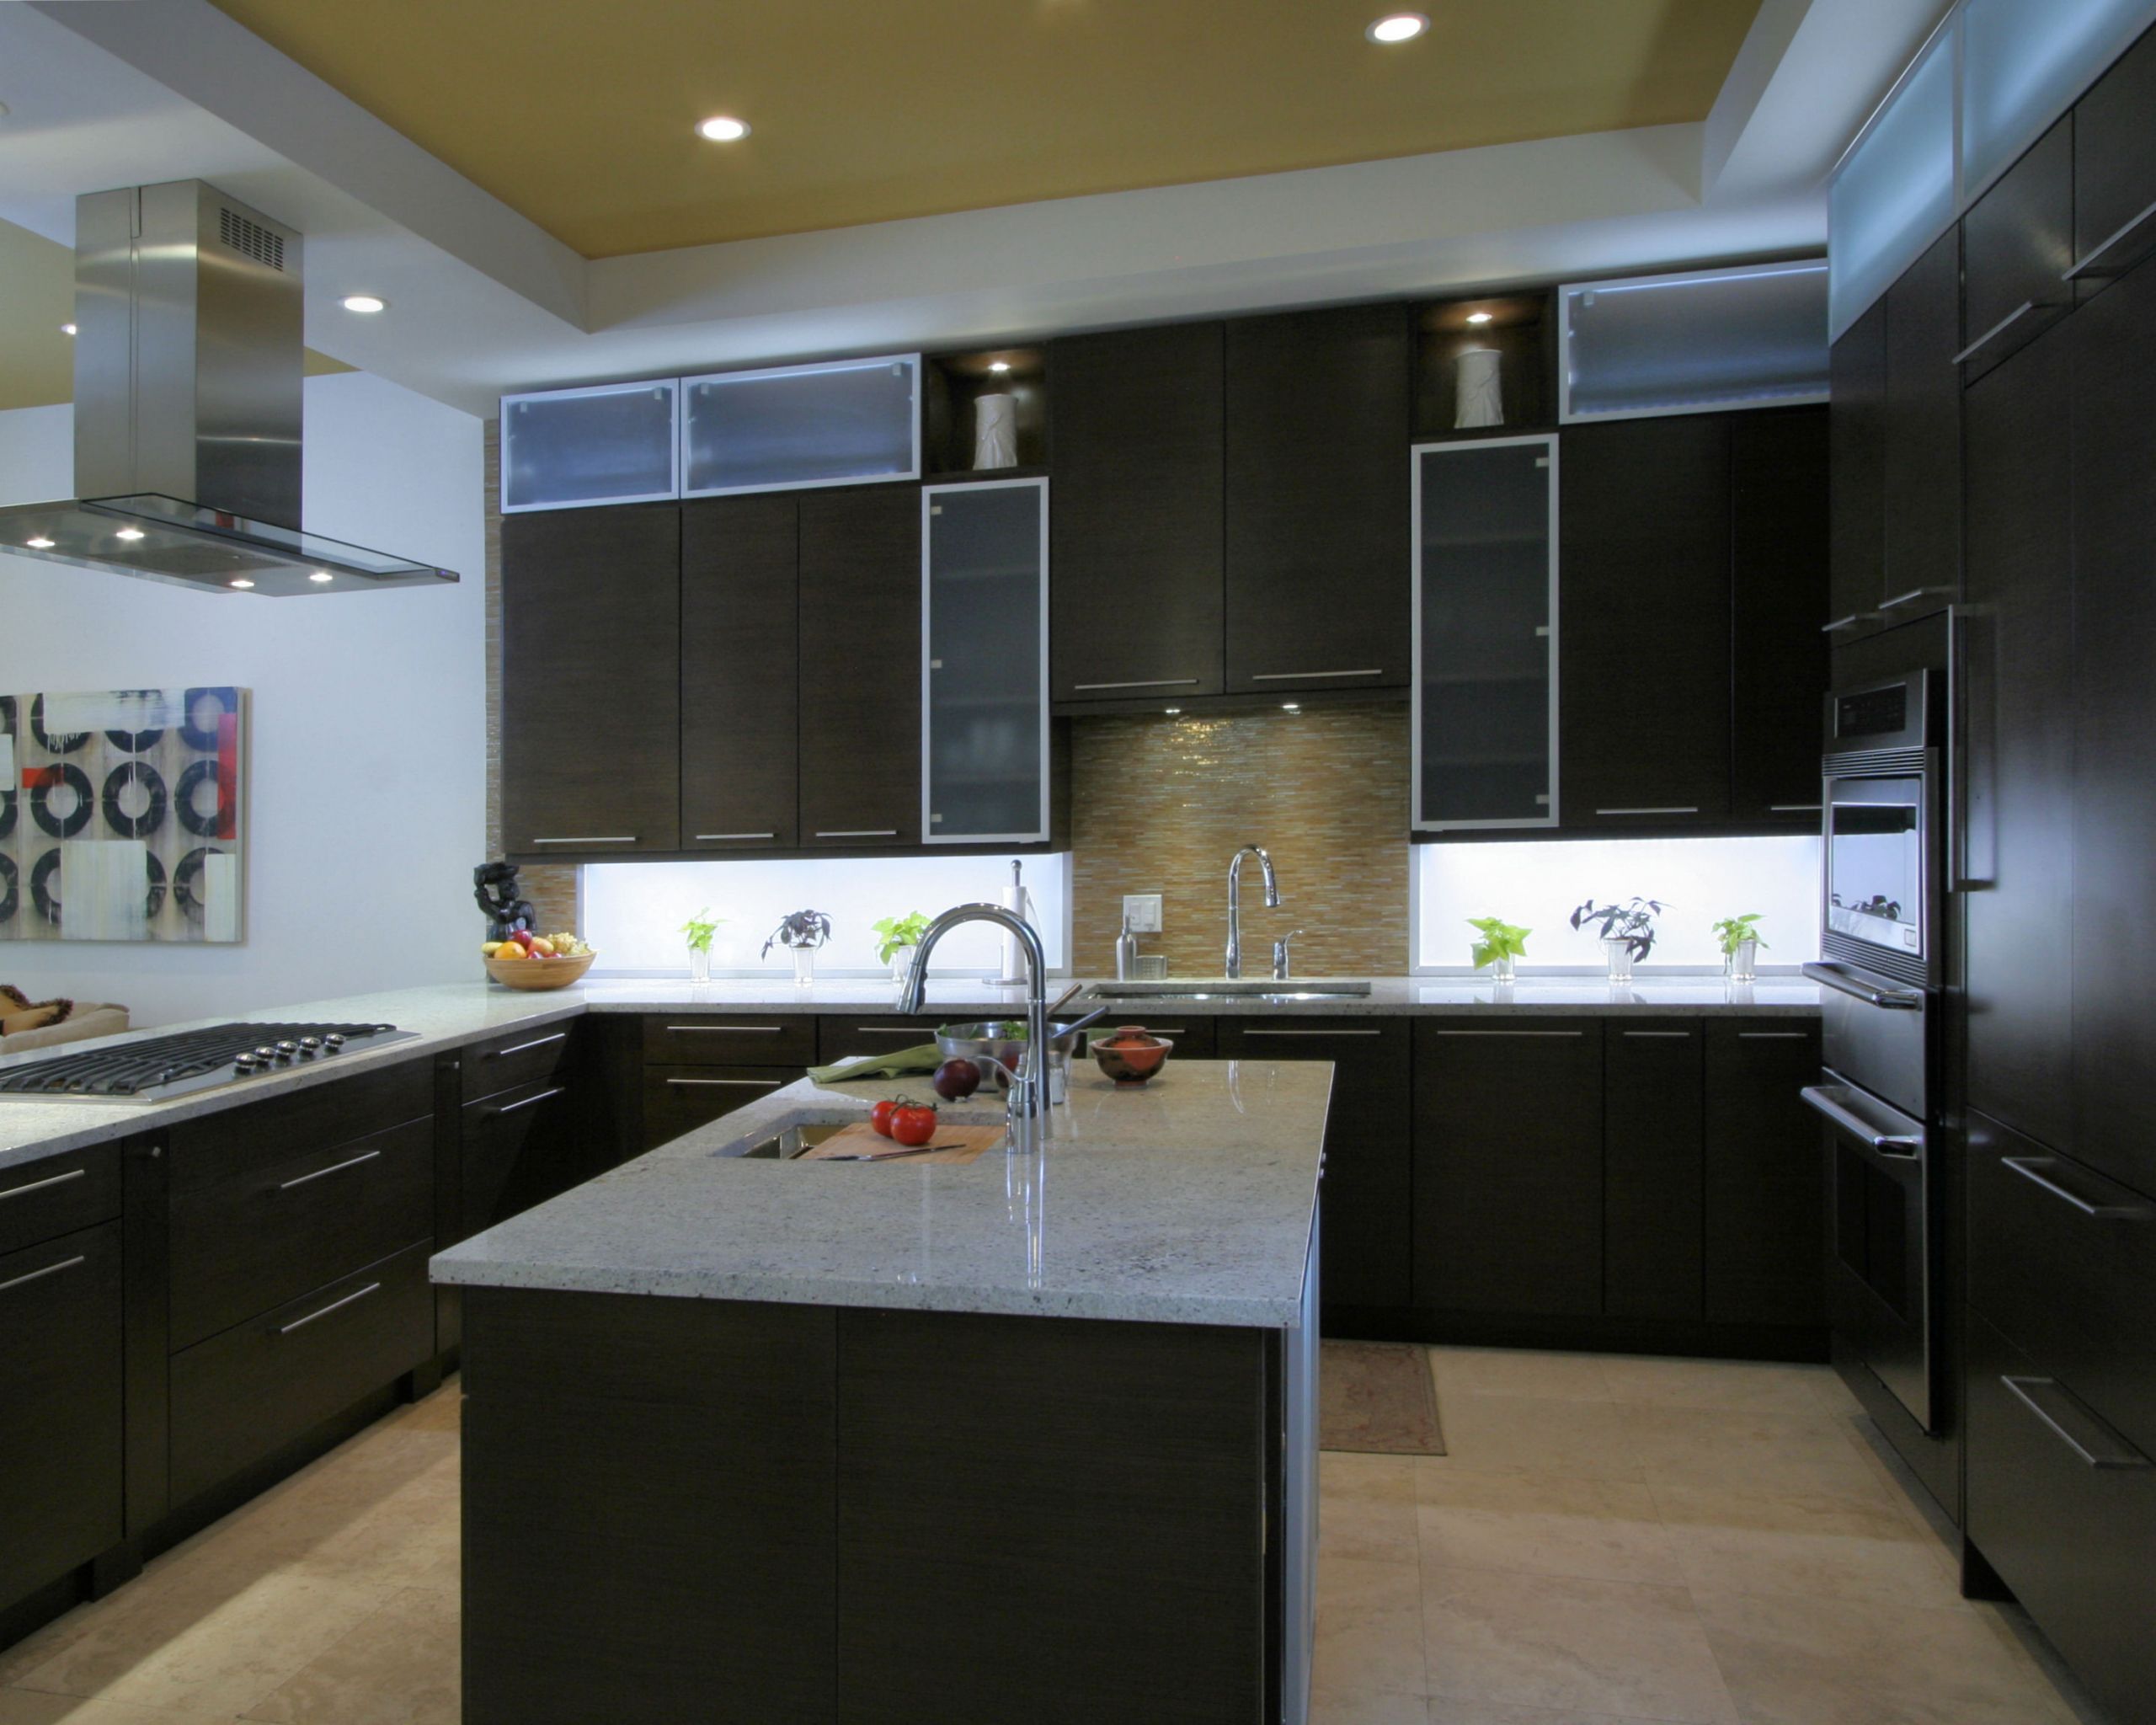 Kitchen Led Lights
 Defining Accent and Task Lighting